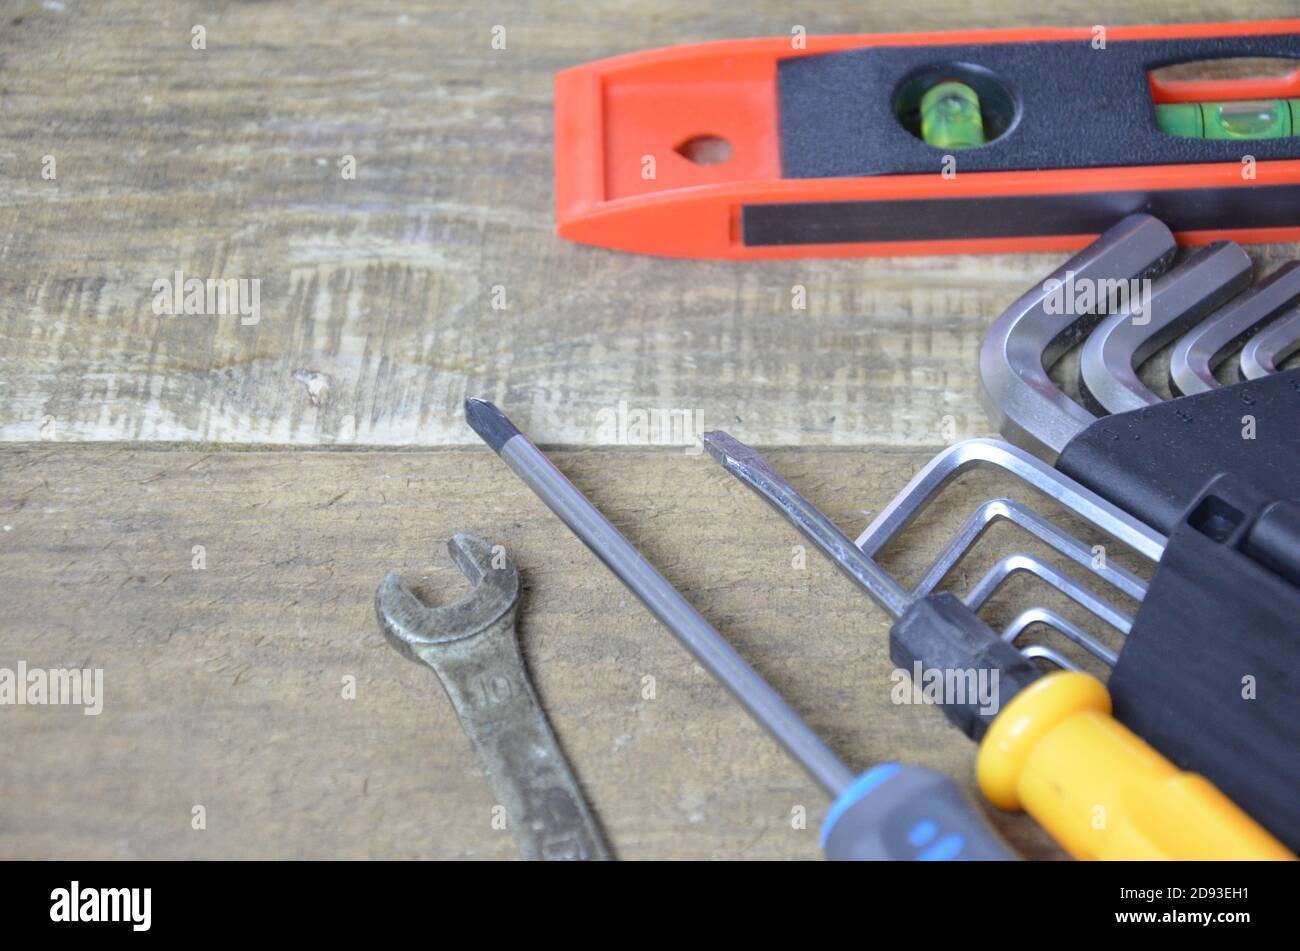 Top view of Working tools,wrench,socket wrench,hammer,screwdriver,plier,electric drill,tape measure,machinist square on wooden board. flat lay design. Stock Photo